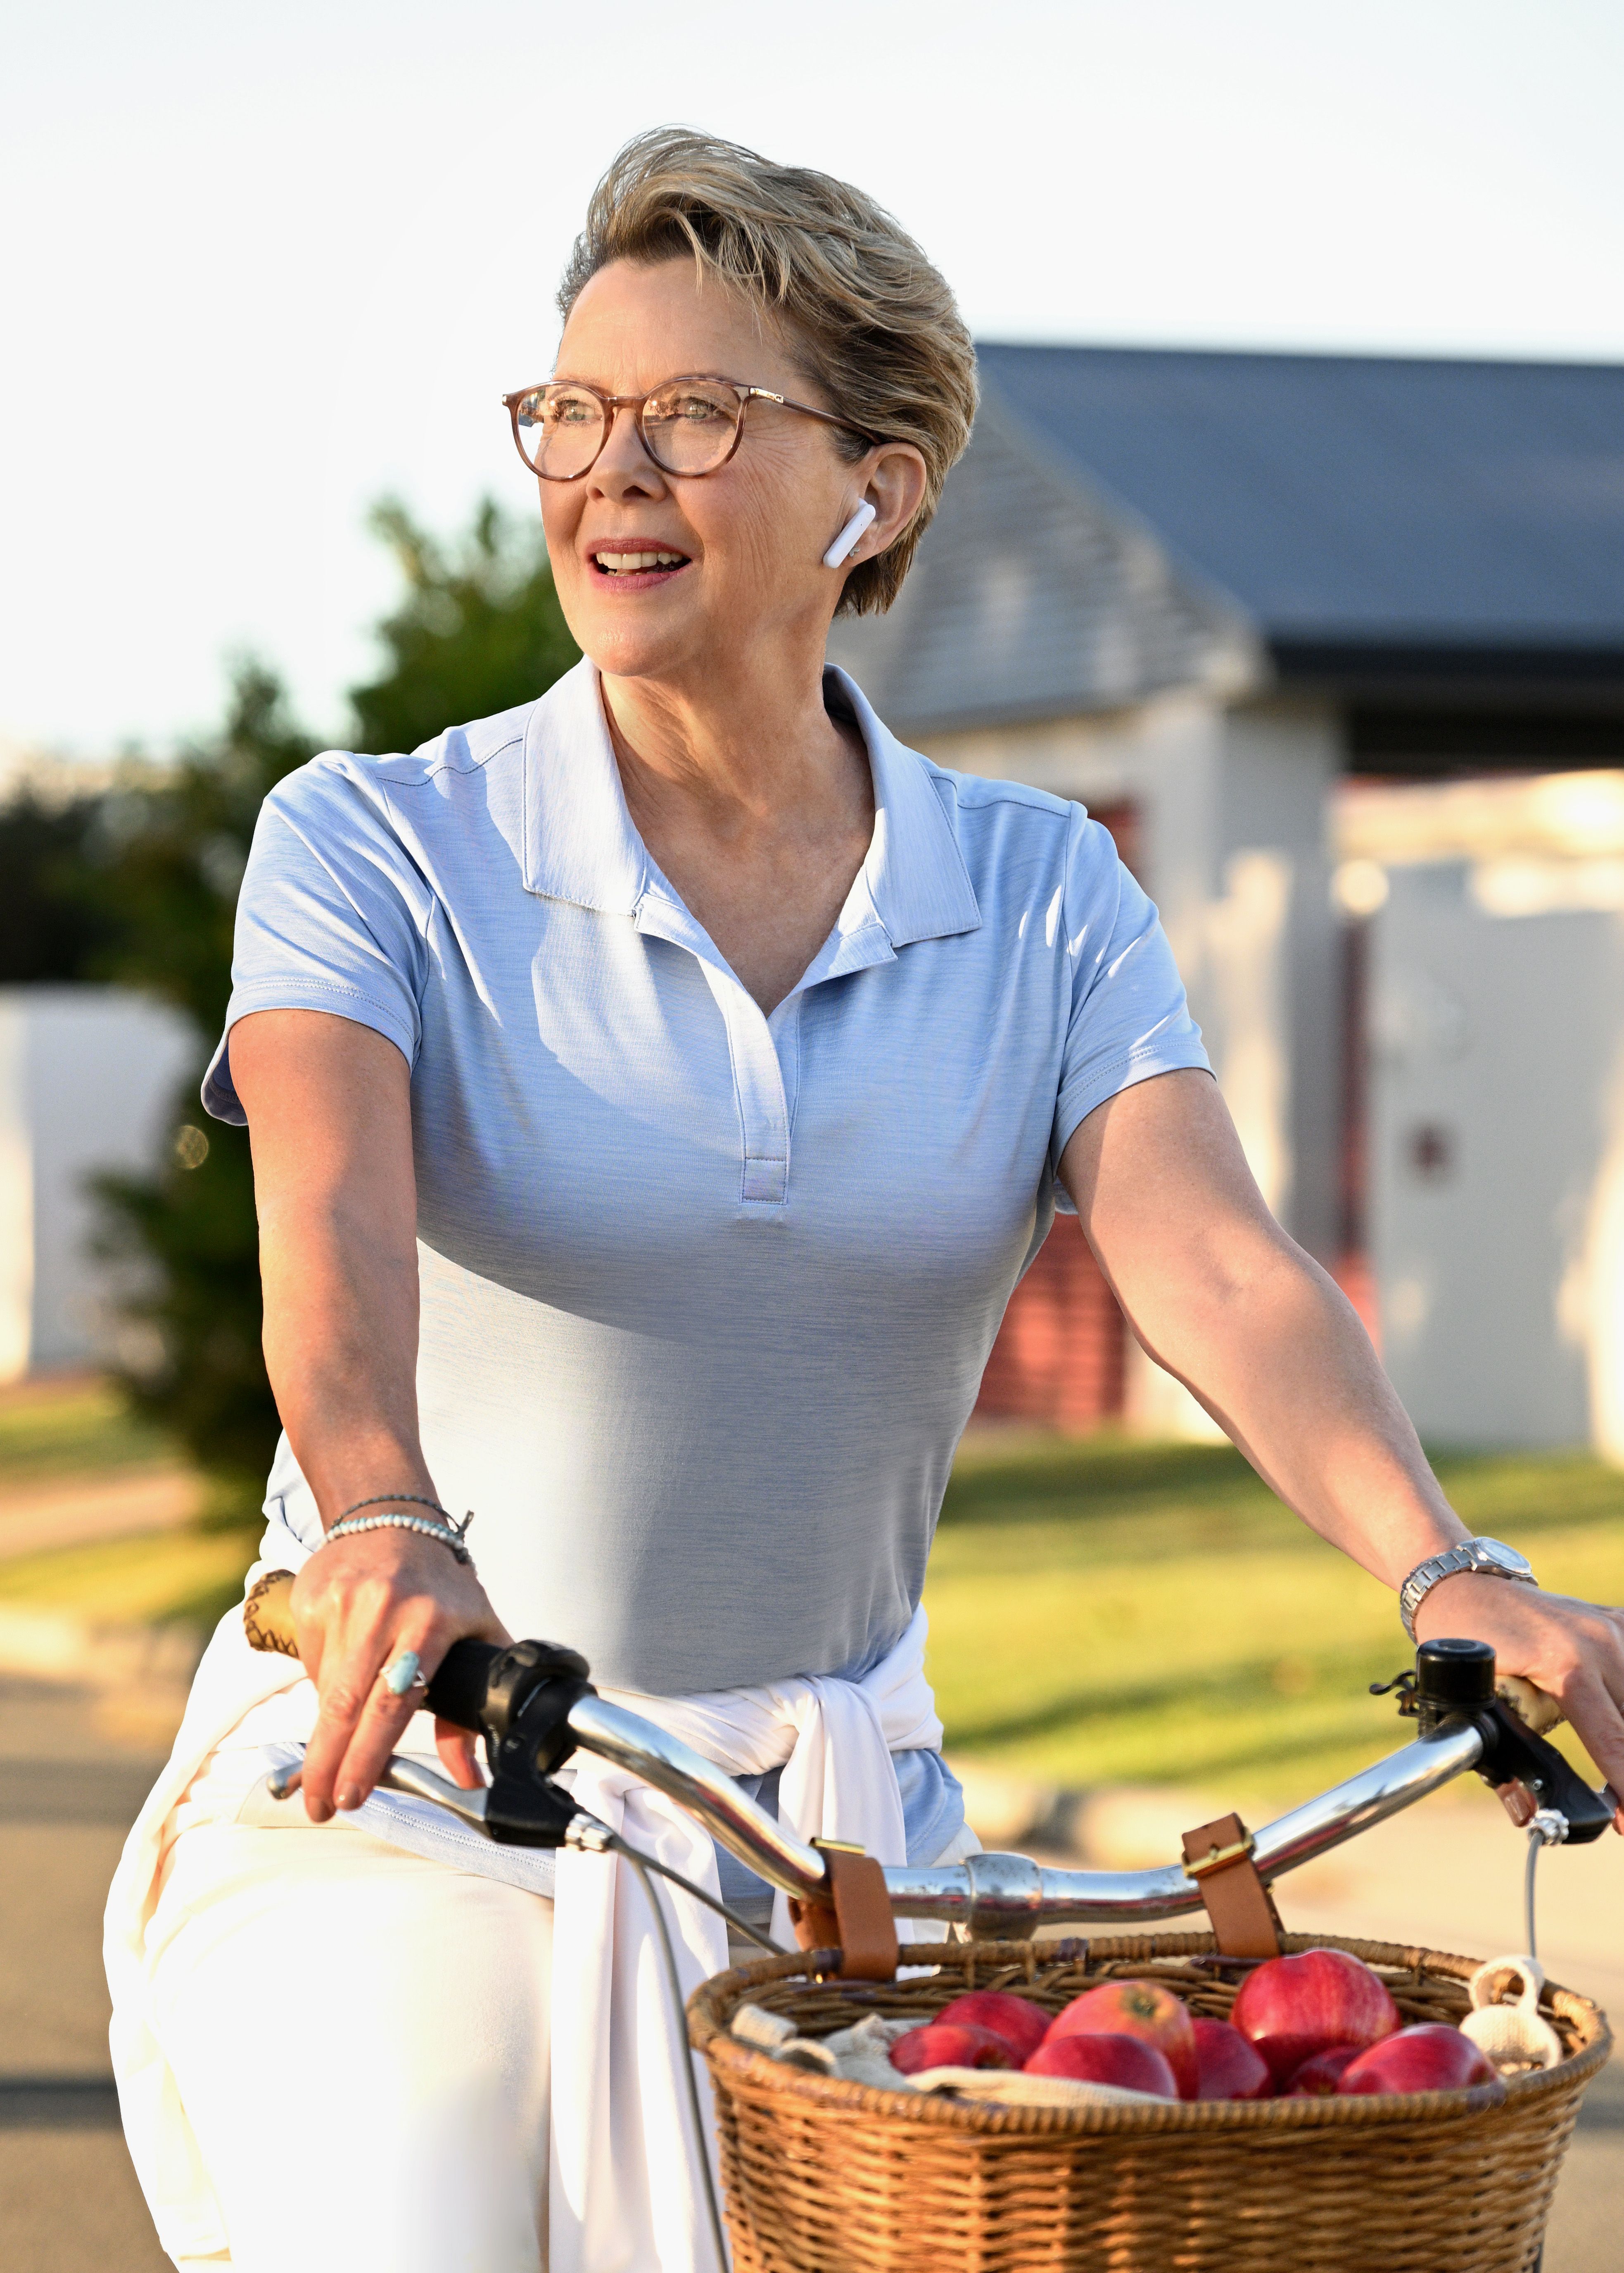 Annette Bening riding a bike through a residential neighborhood in Apples Never Fall